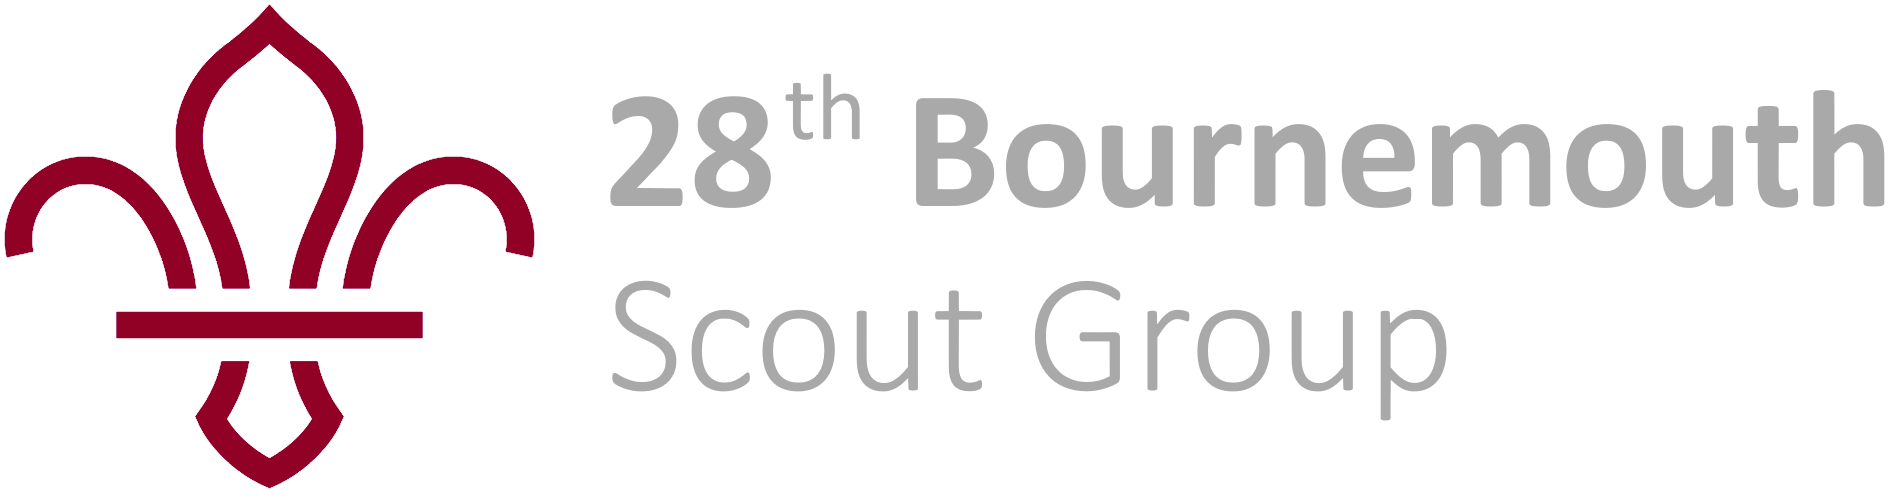 28th Bournemouth Scout Group